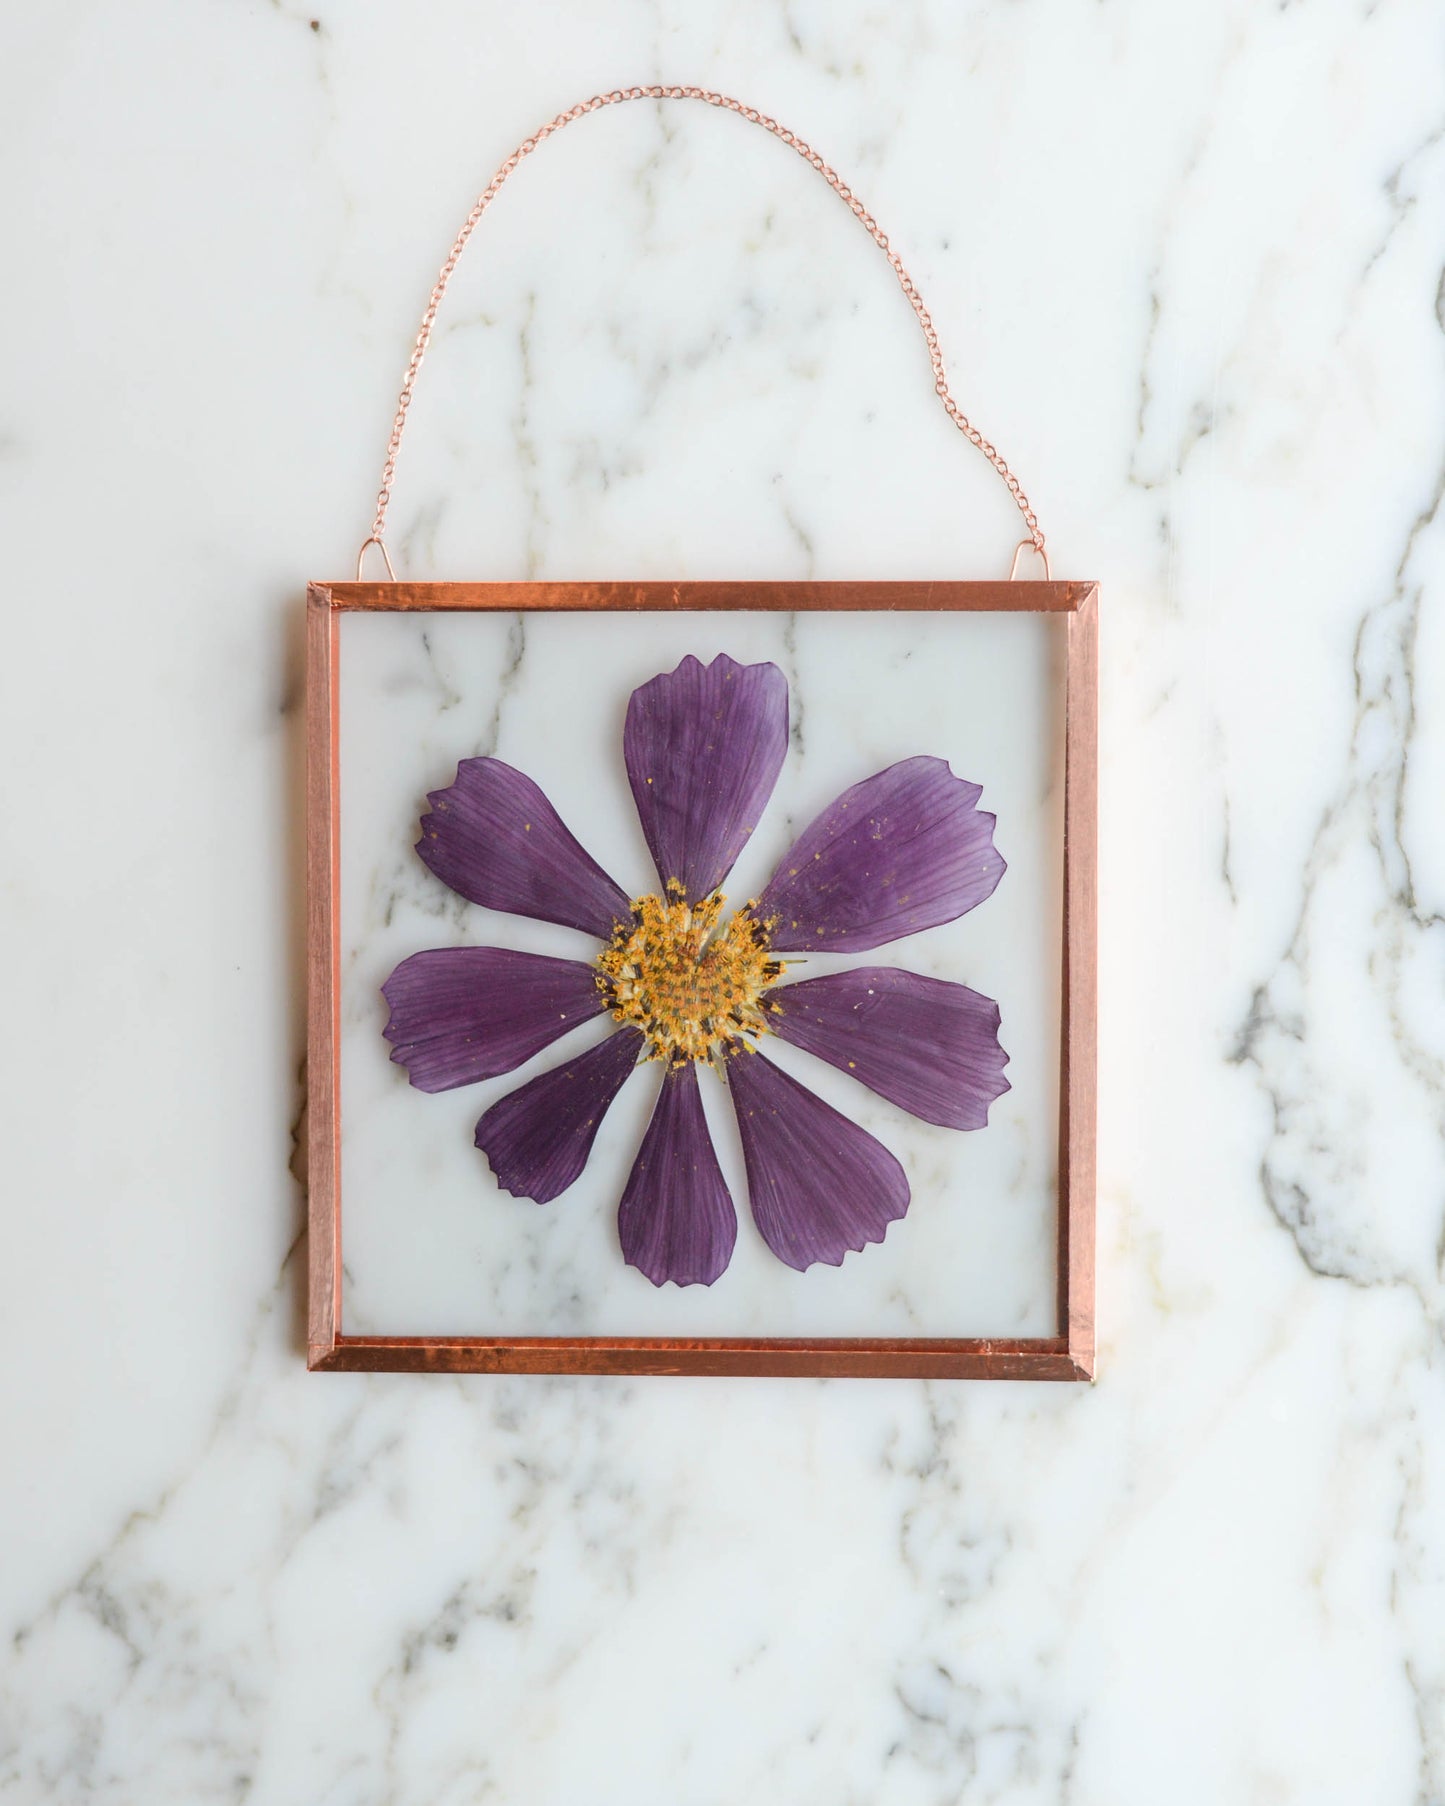 Garden Blooms - Real Pressed Flowers in Medium Glass and Copper Wall Hanging